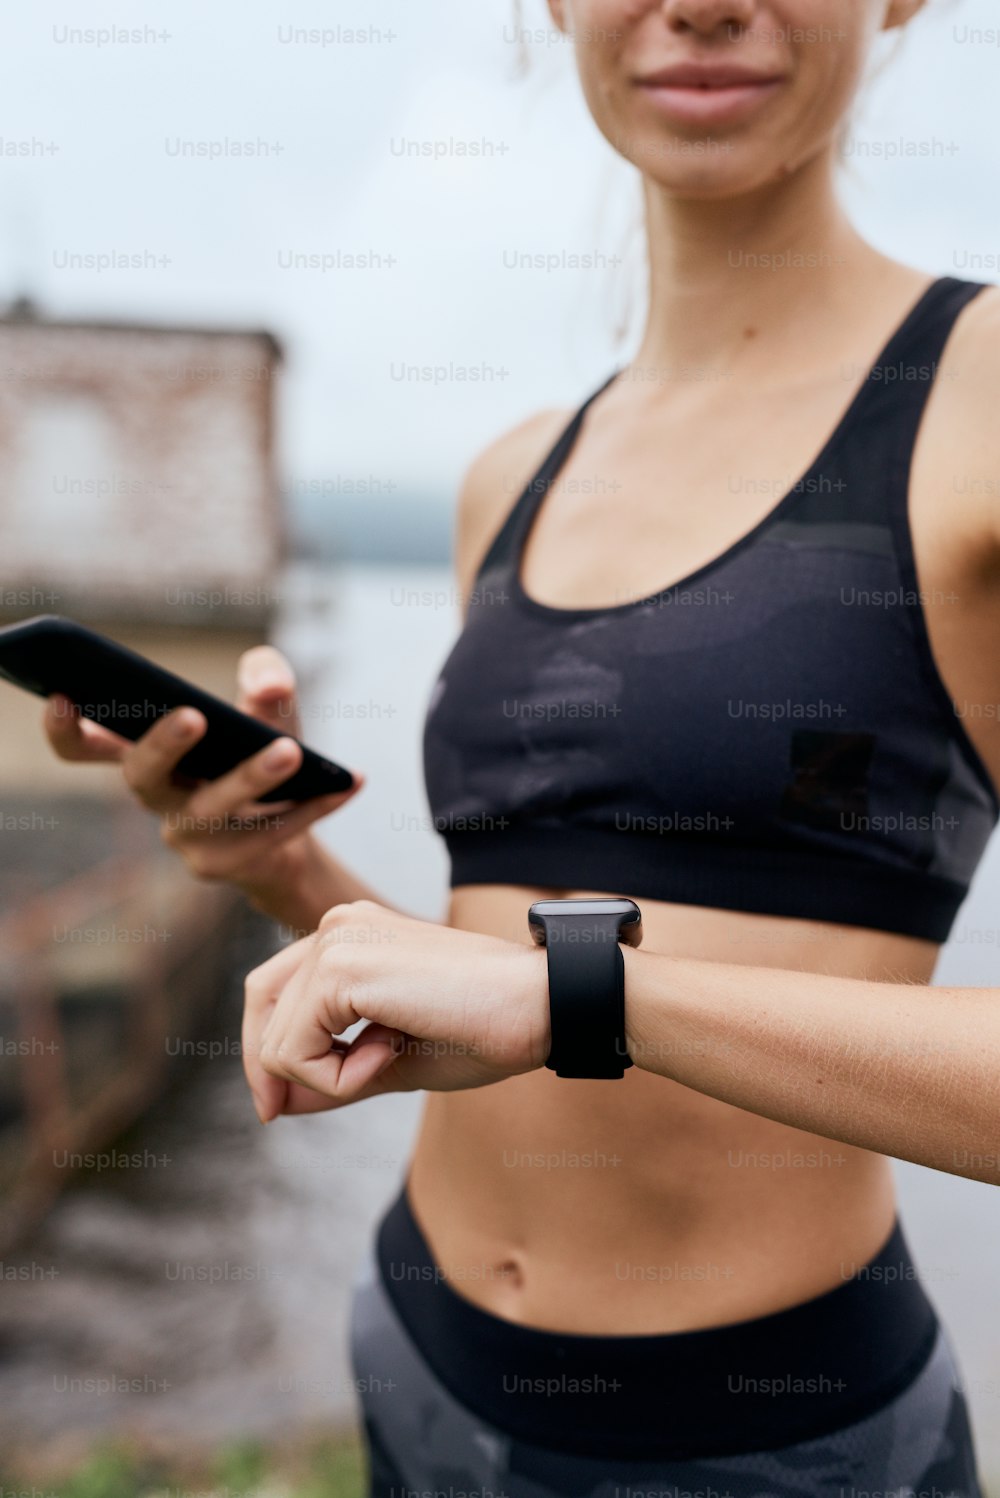 Portrait of mid age skinny sports woman checking smart watch with smart phone, synchronizing, exercising outdoor in summer, on gloomy day with scenic view, wearing tank